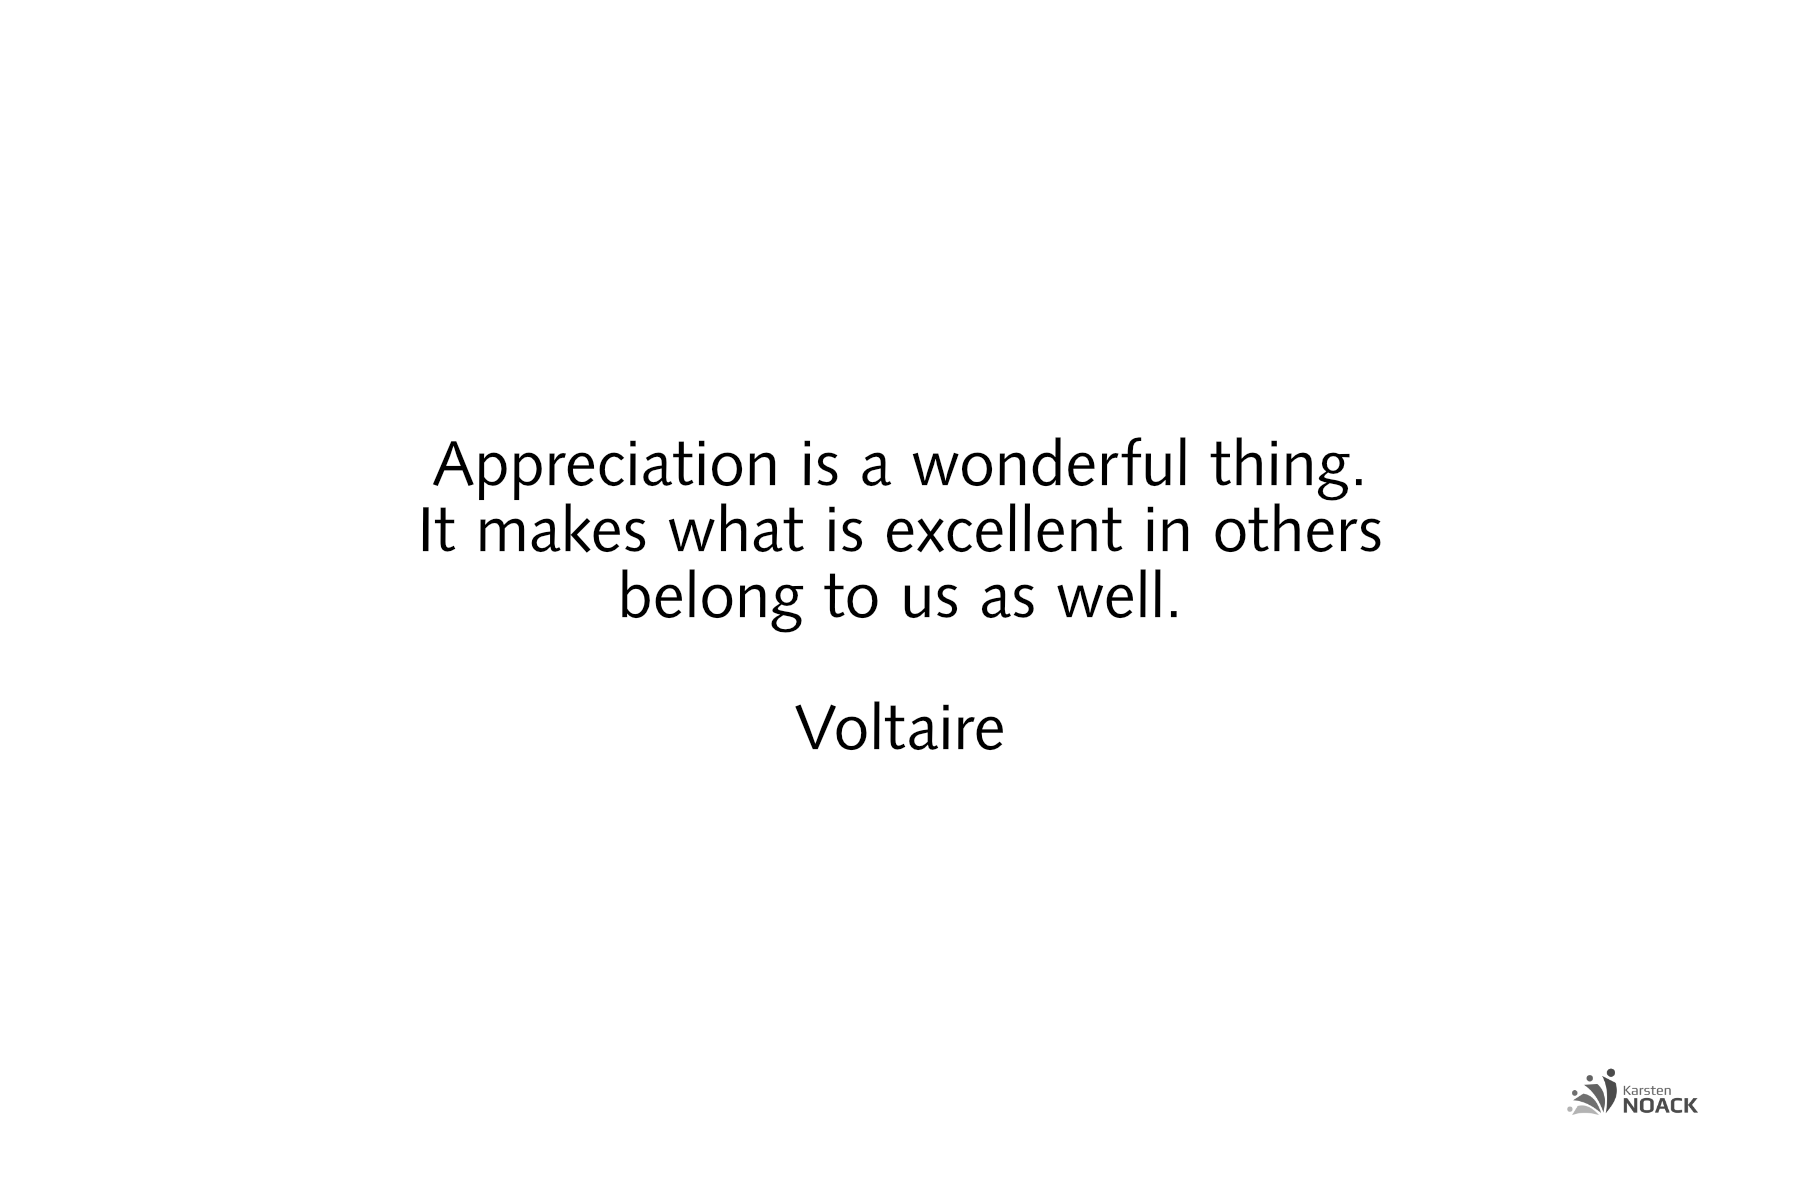 The Importance of Appreciation